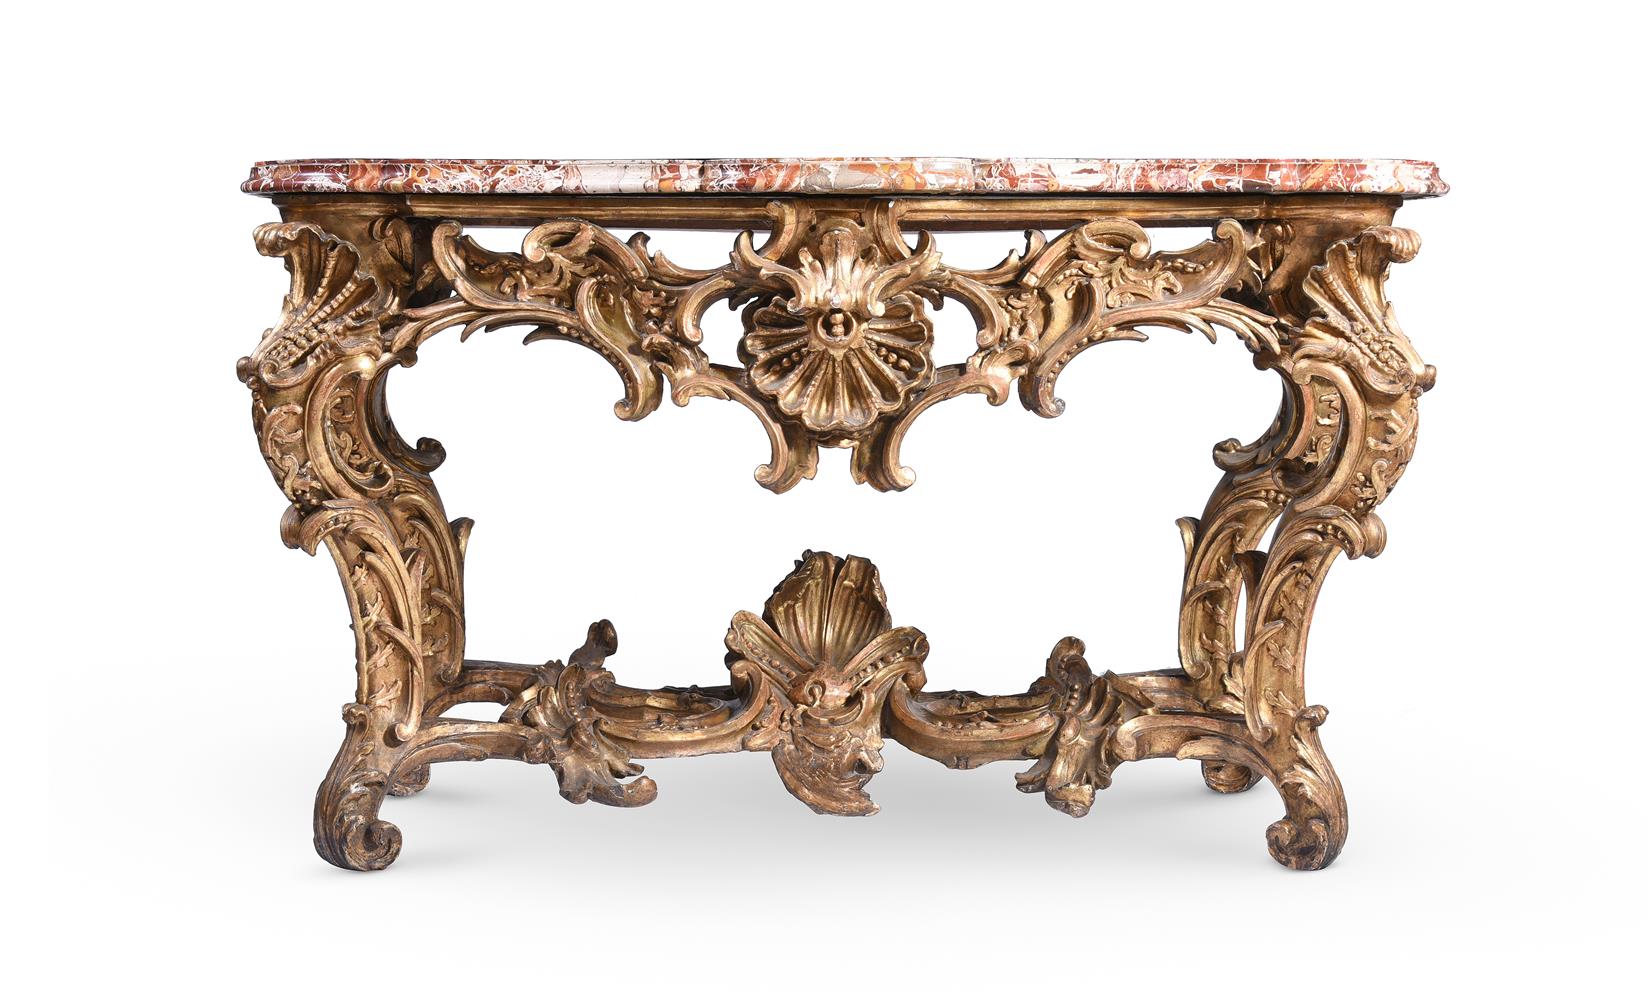 AN ITALIAN CARVED GILTWOOD SERPENTINE CONSOLE TABLE, 18TH CENTURY - Image 2 of 6